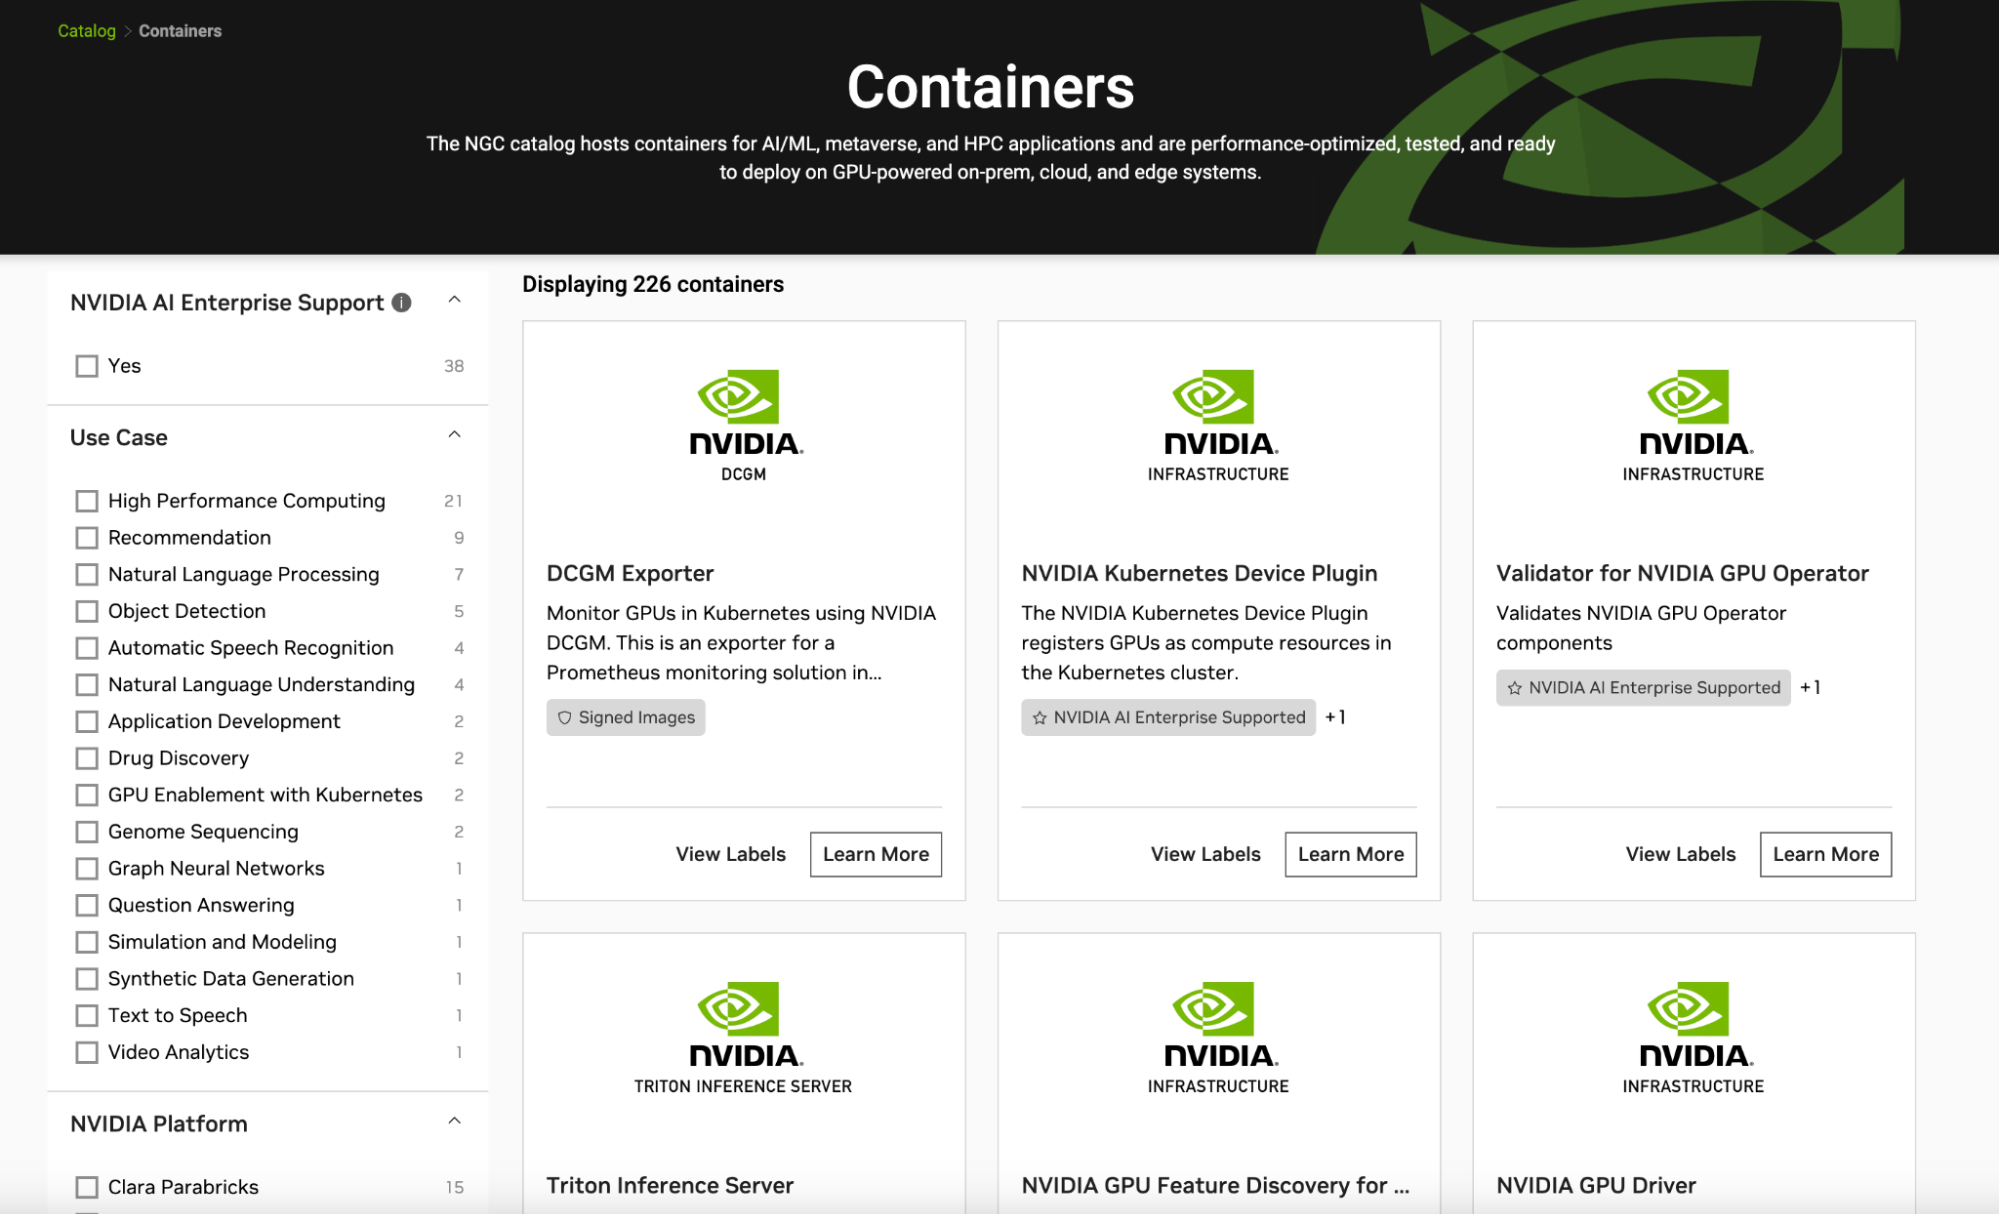 Screenshot of the available containers for various use cases on the NGC catalog.